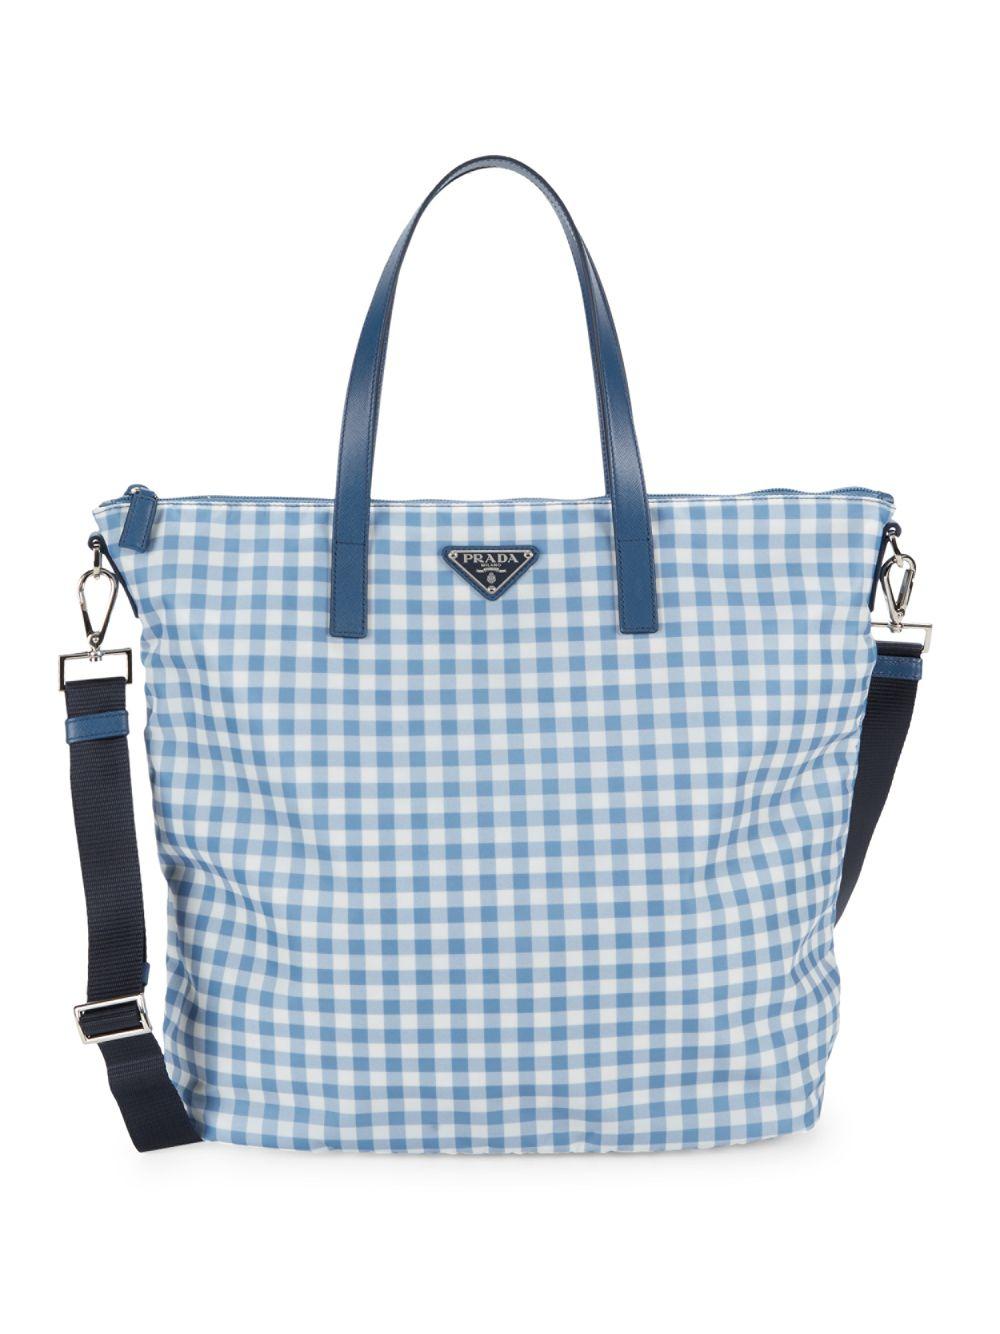 Prada Leather Gingham Tote in Blue White (Blue) | Lyst